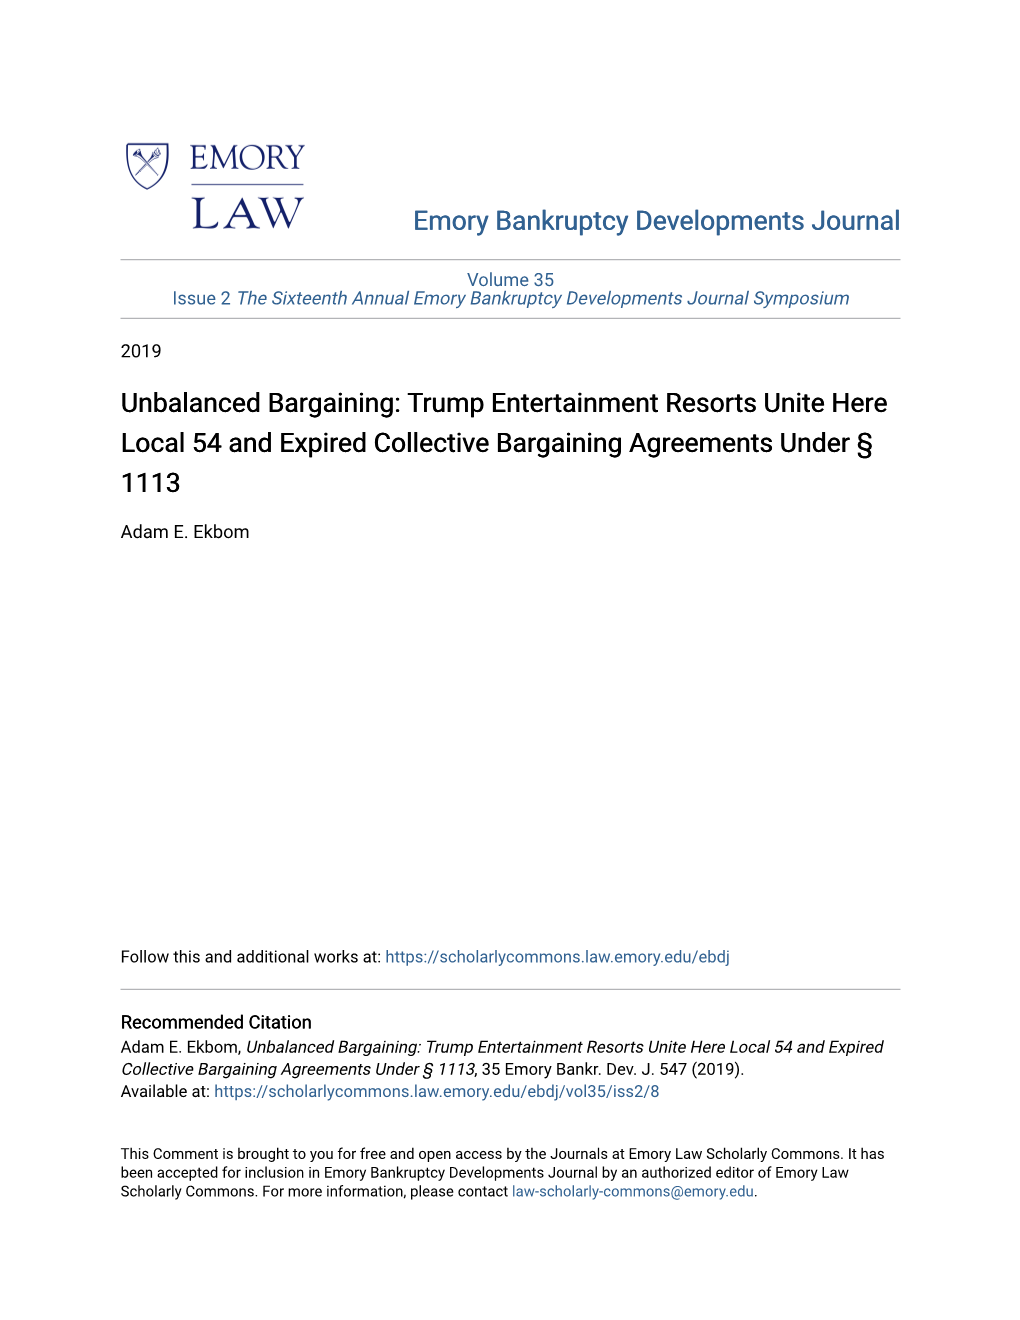 Unbalanced Bargaining: Trump Entertainment Resorts Unite Here Local 54 and Expired Collective Bargaining Agreements Under § 1113